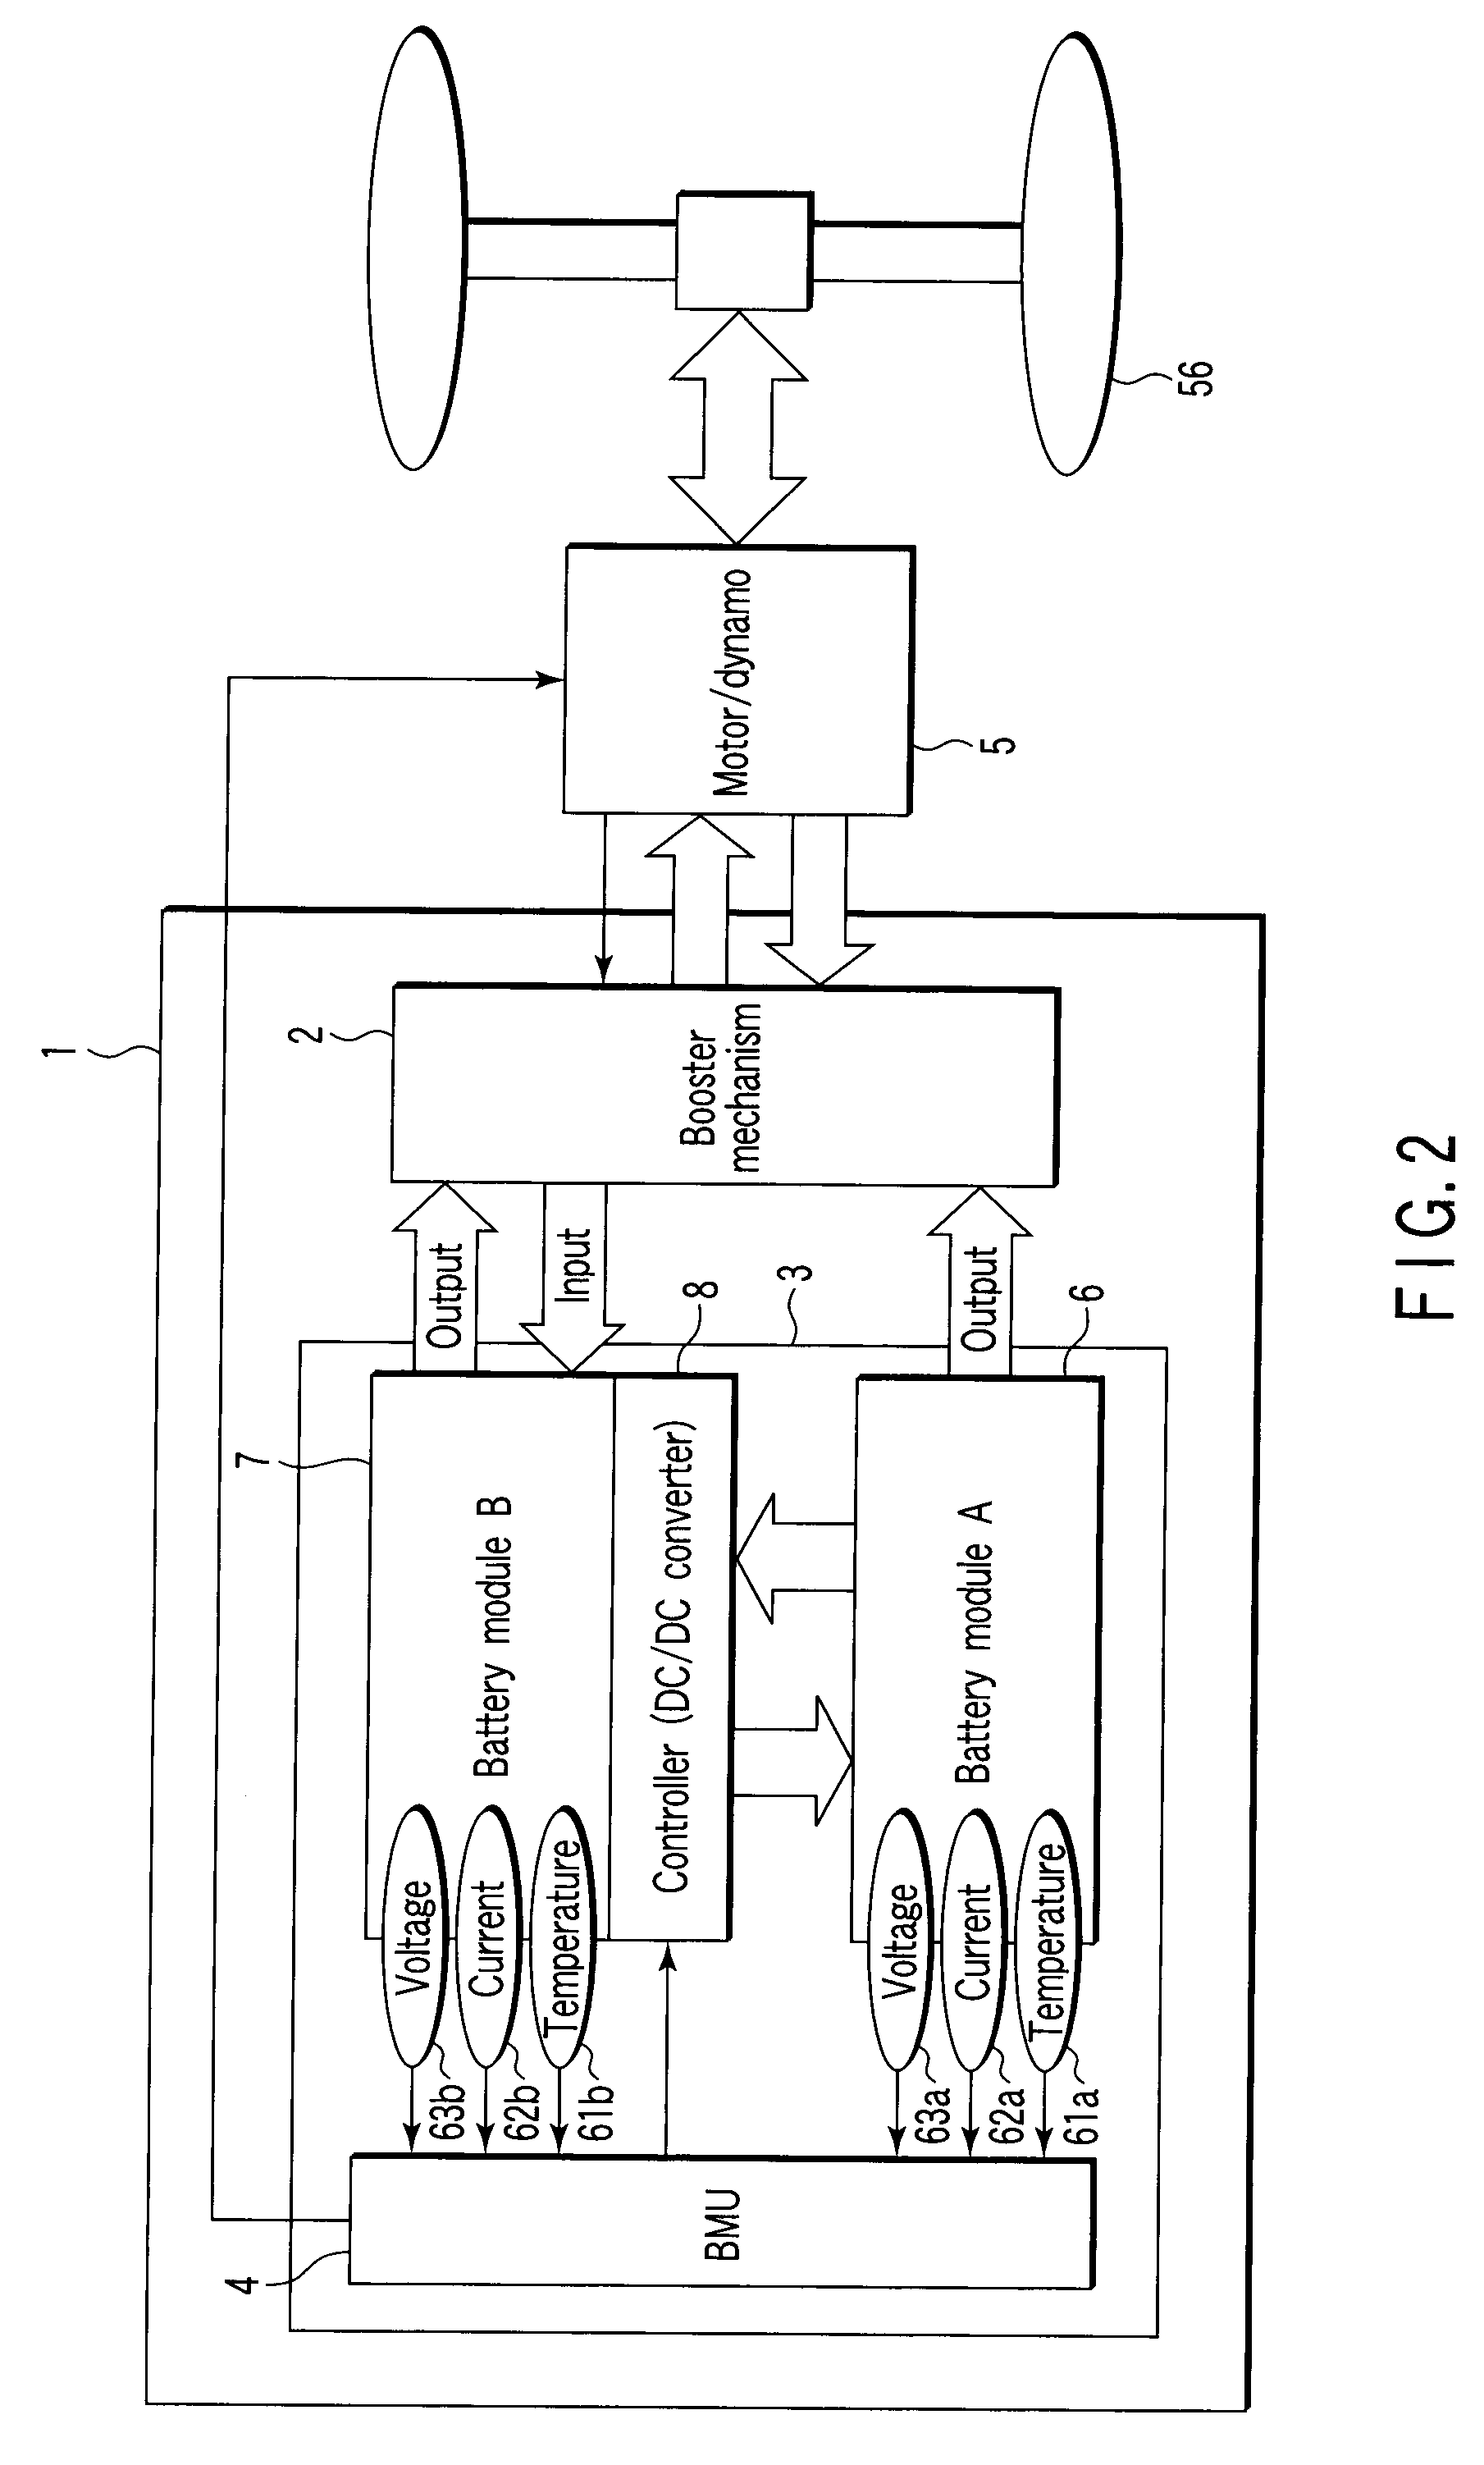 Storage battery system, on-vehicle power supply system, vehicle and method for charging storage battery system